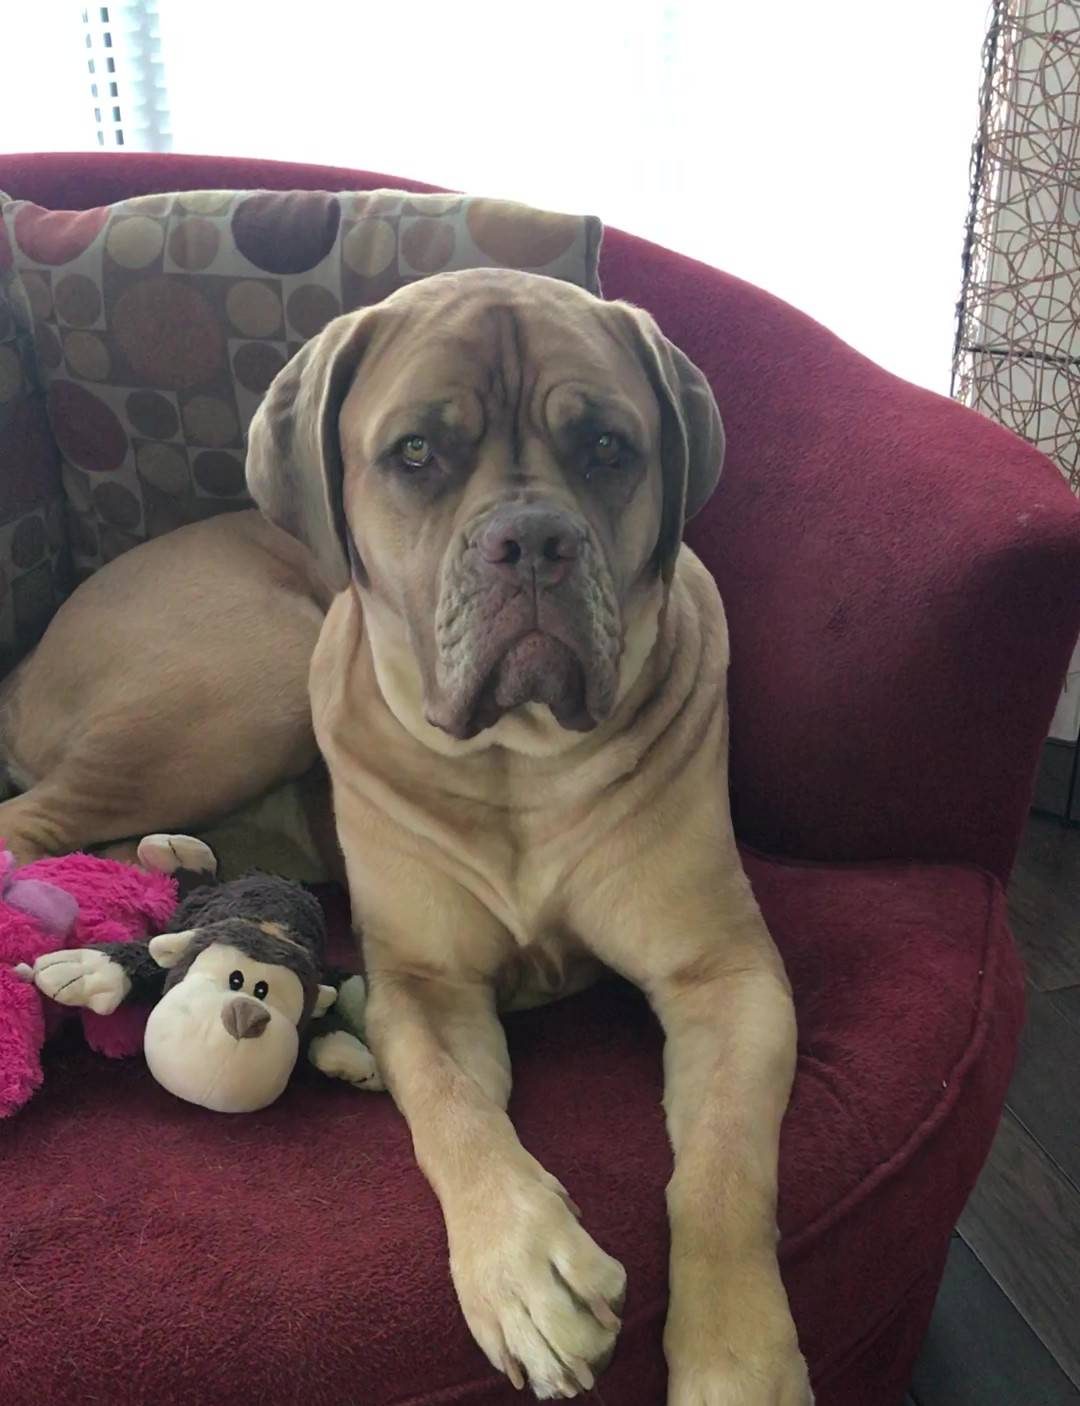 Miss Mabel, Tanya Kim's  Dogue de Bordeaux is a cherished member of the family and therapy dog.